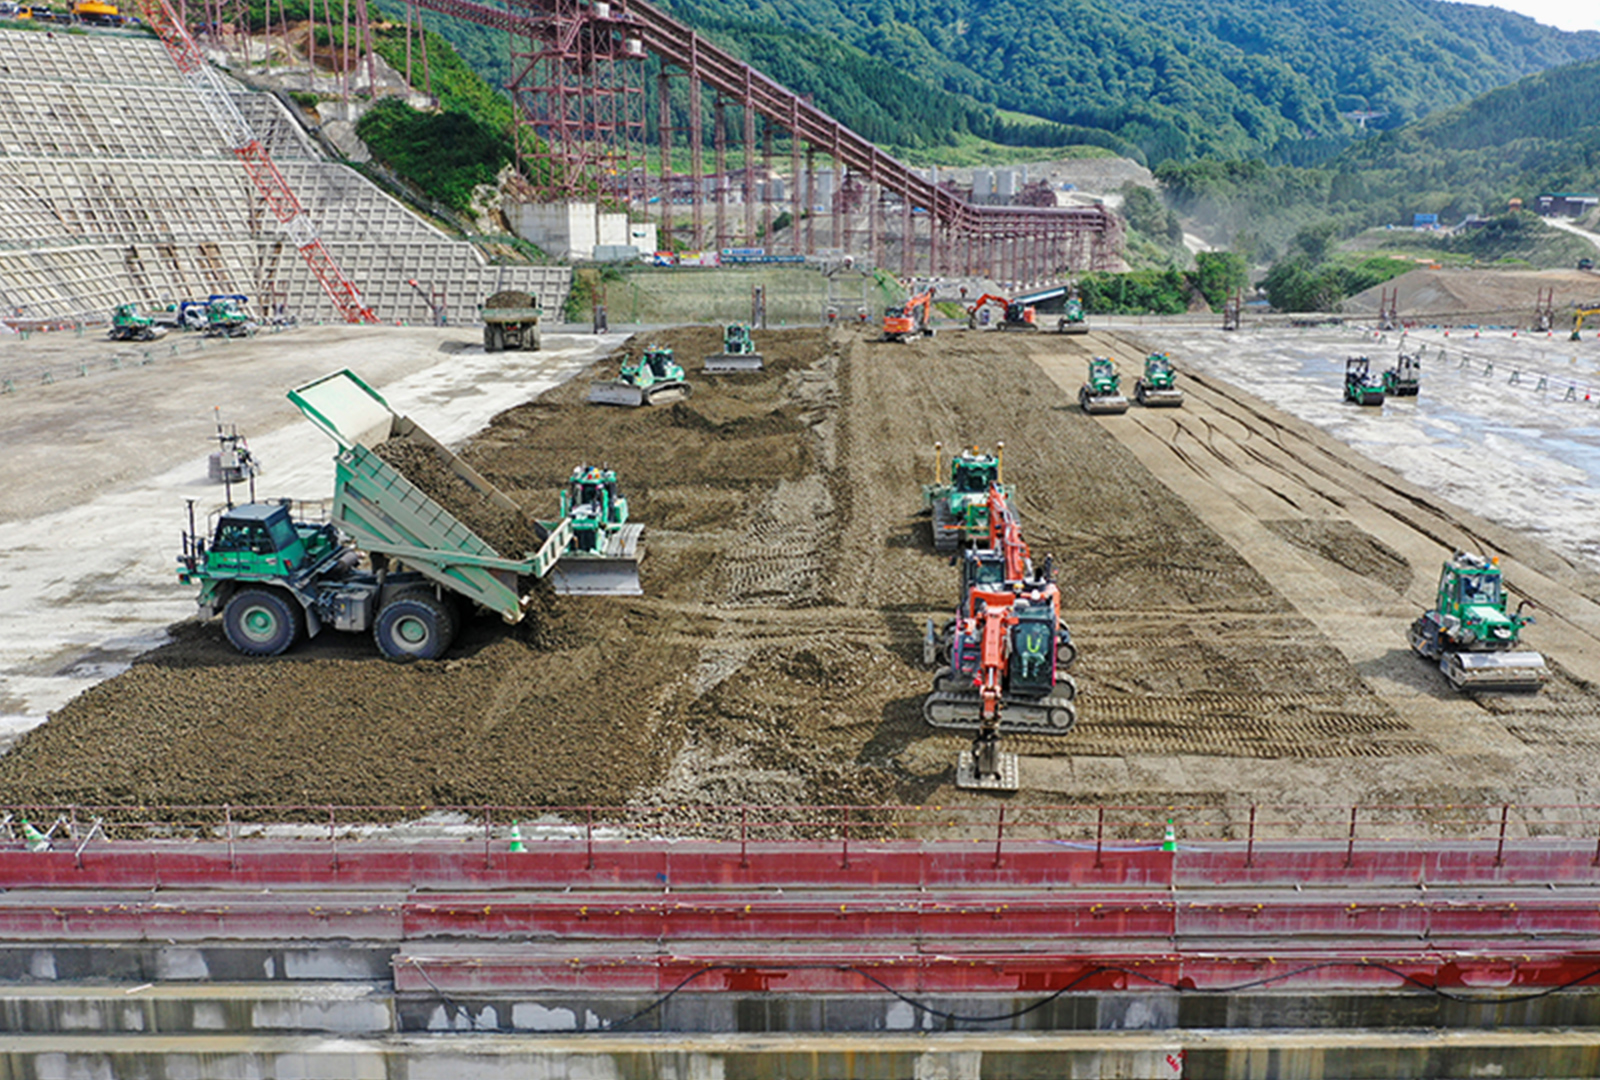 A4CSEL’s automated construction machinery working in collaboration to place CSG to the dam embankment